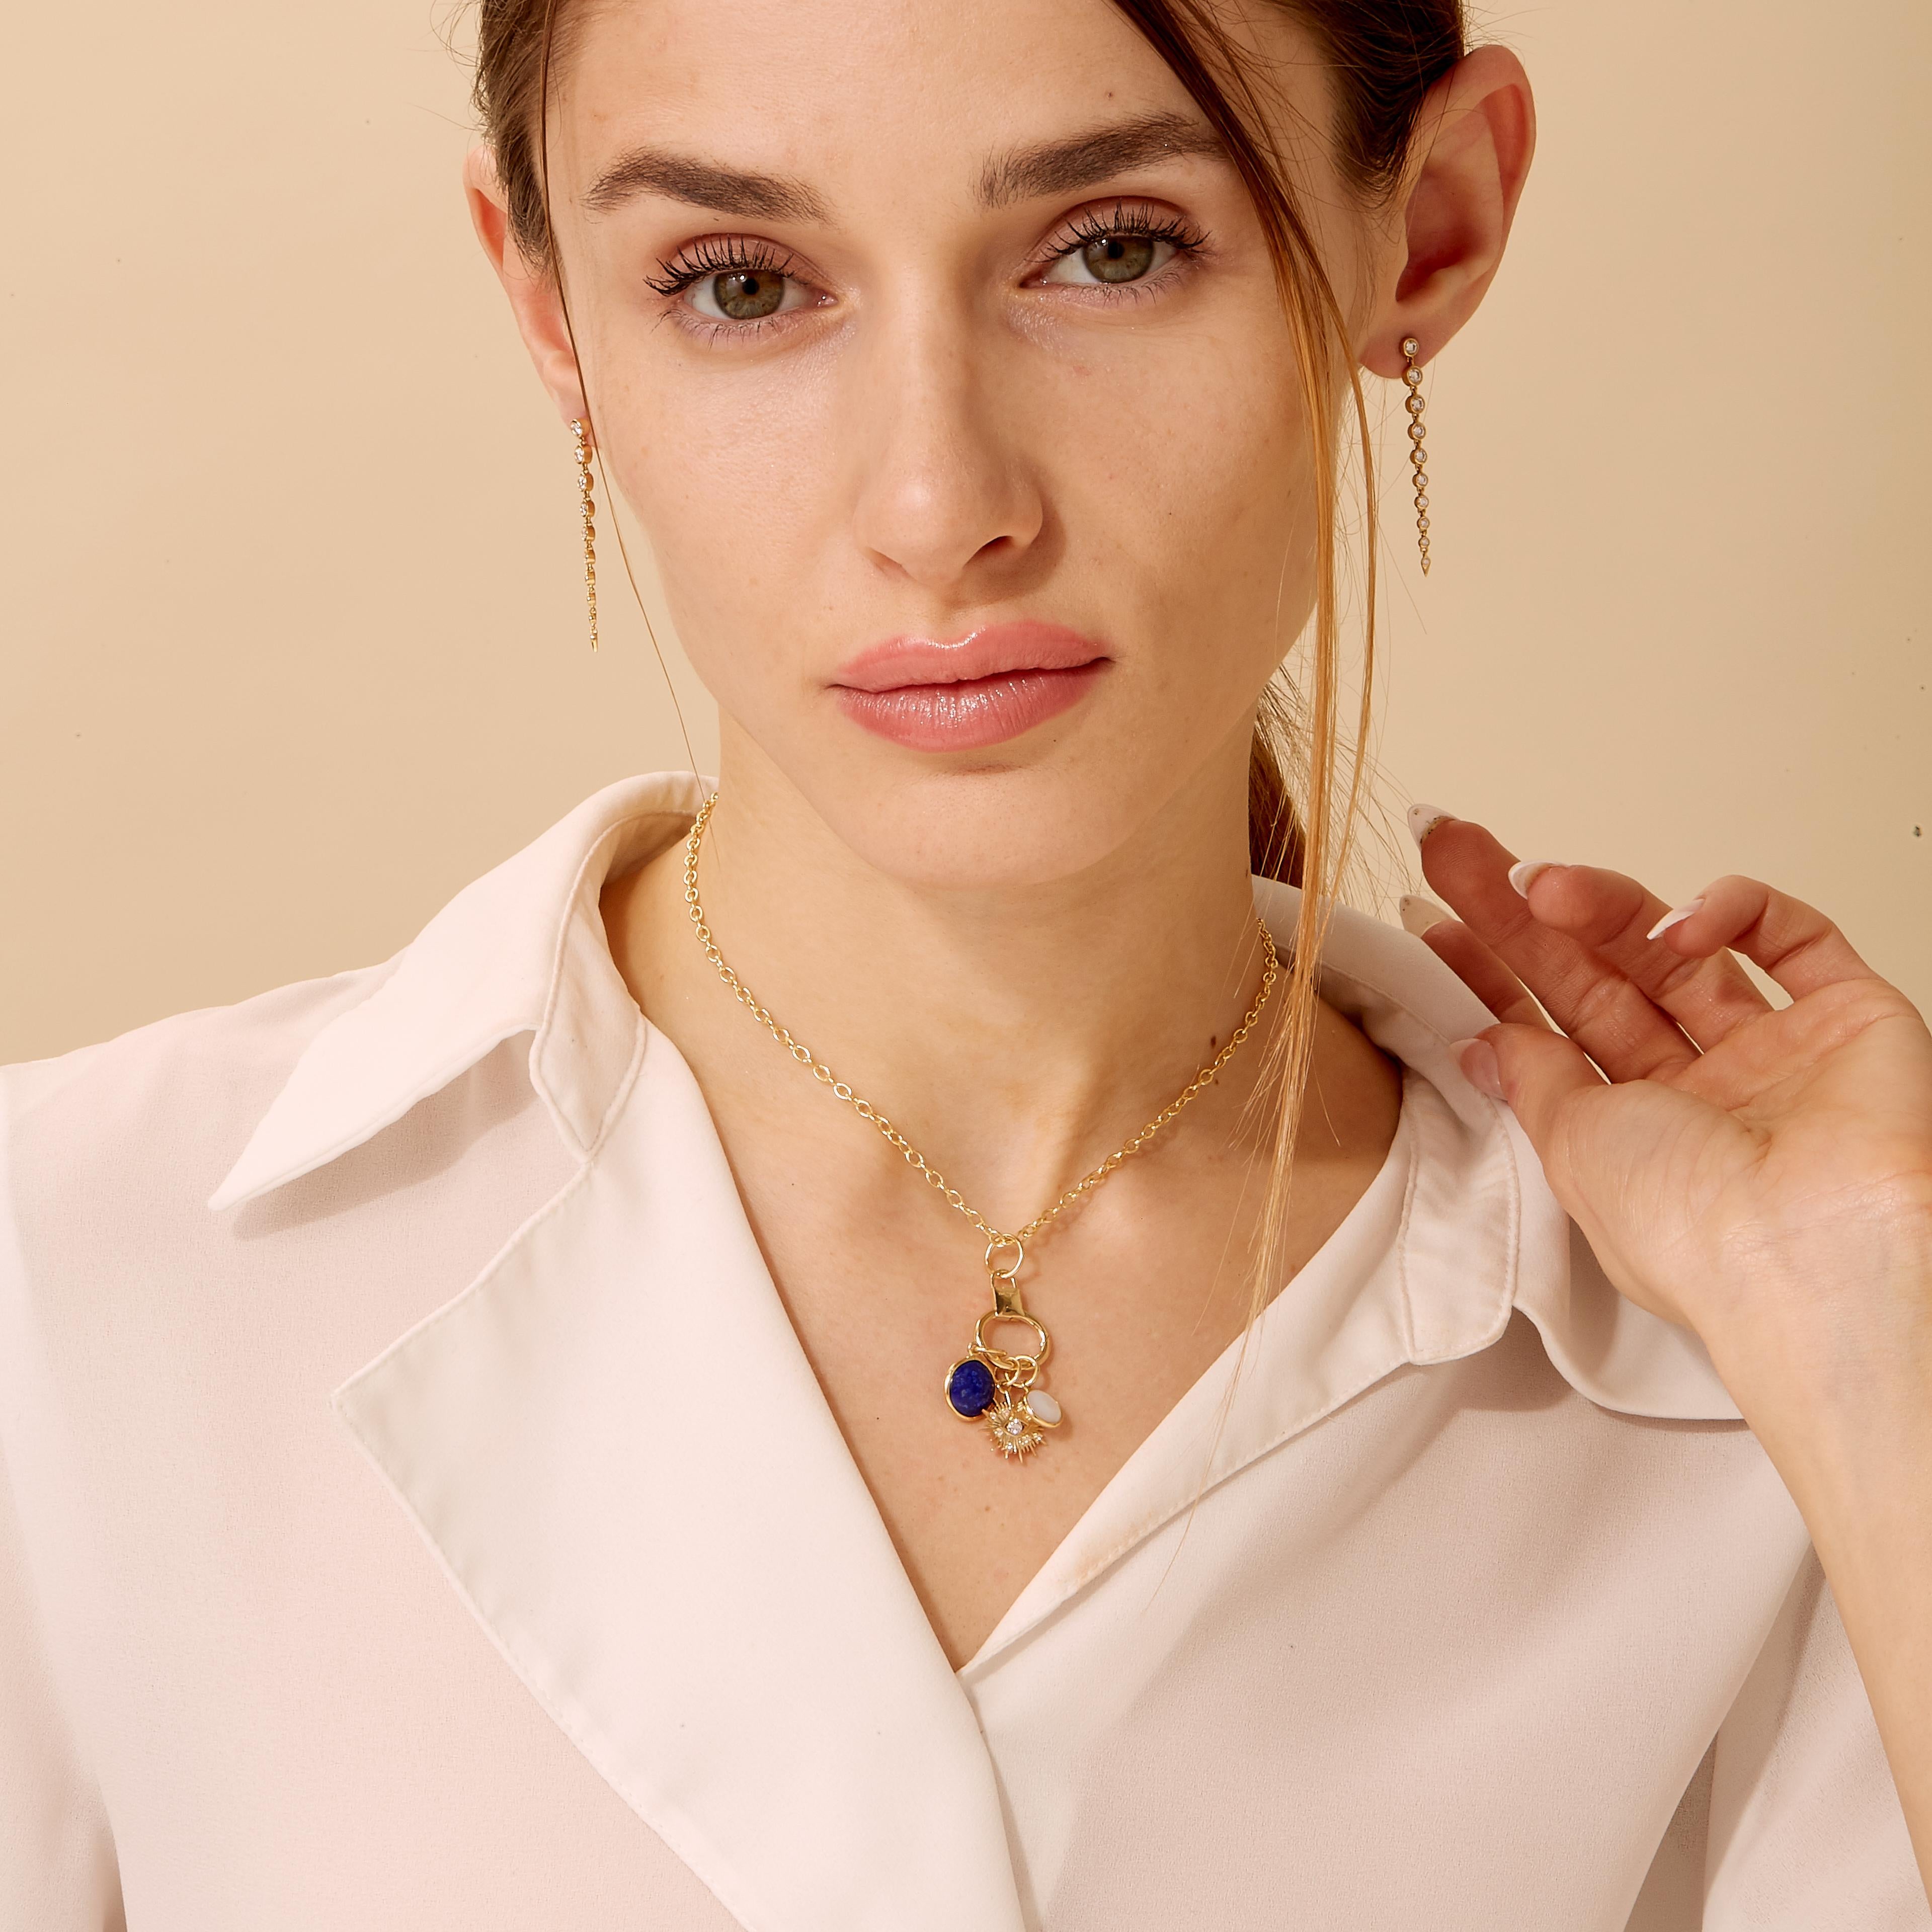 Created in 18 karat yellow gold
Lapis lazuli 3.50 carats approx.
Mother of pearl 1.40 carats approx.
Diamond 0.10 carat approx.
18 inch, adjustable at 16-17
Limited edition

Exquisitely crafted in 18 karat yellow gold, this limited edition necklace